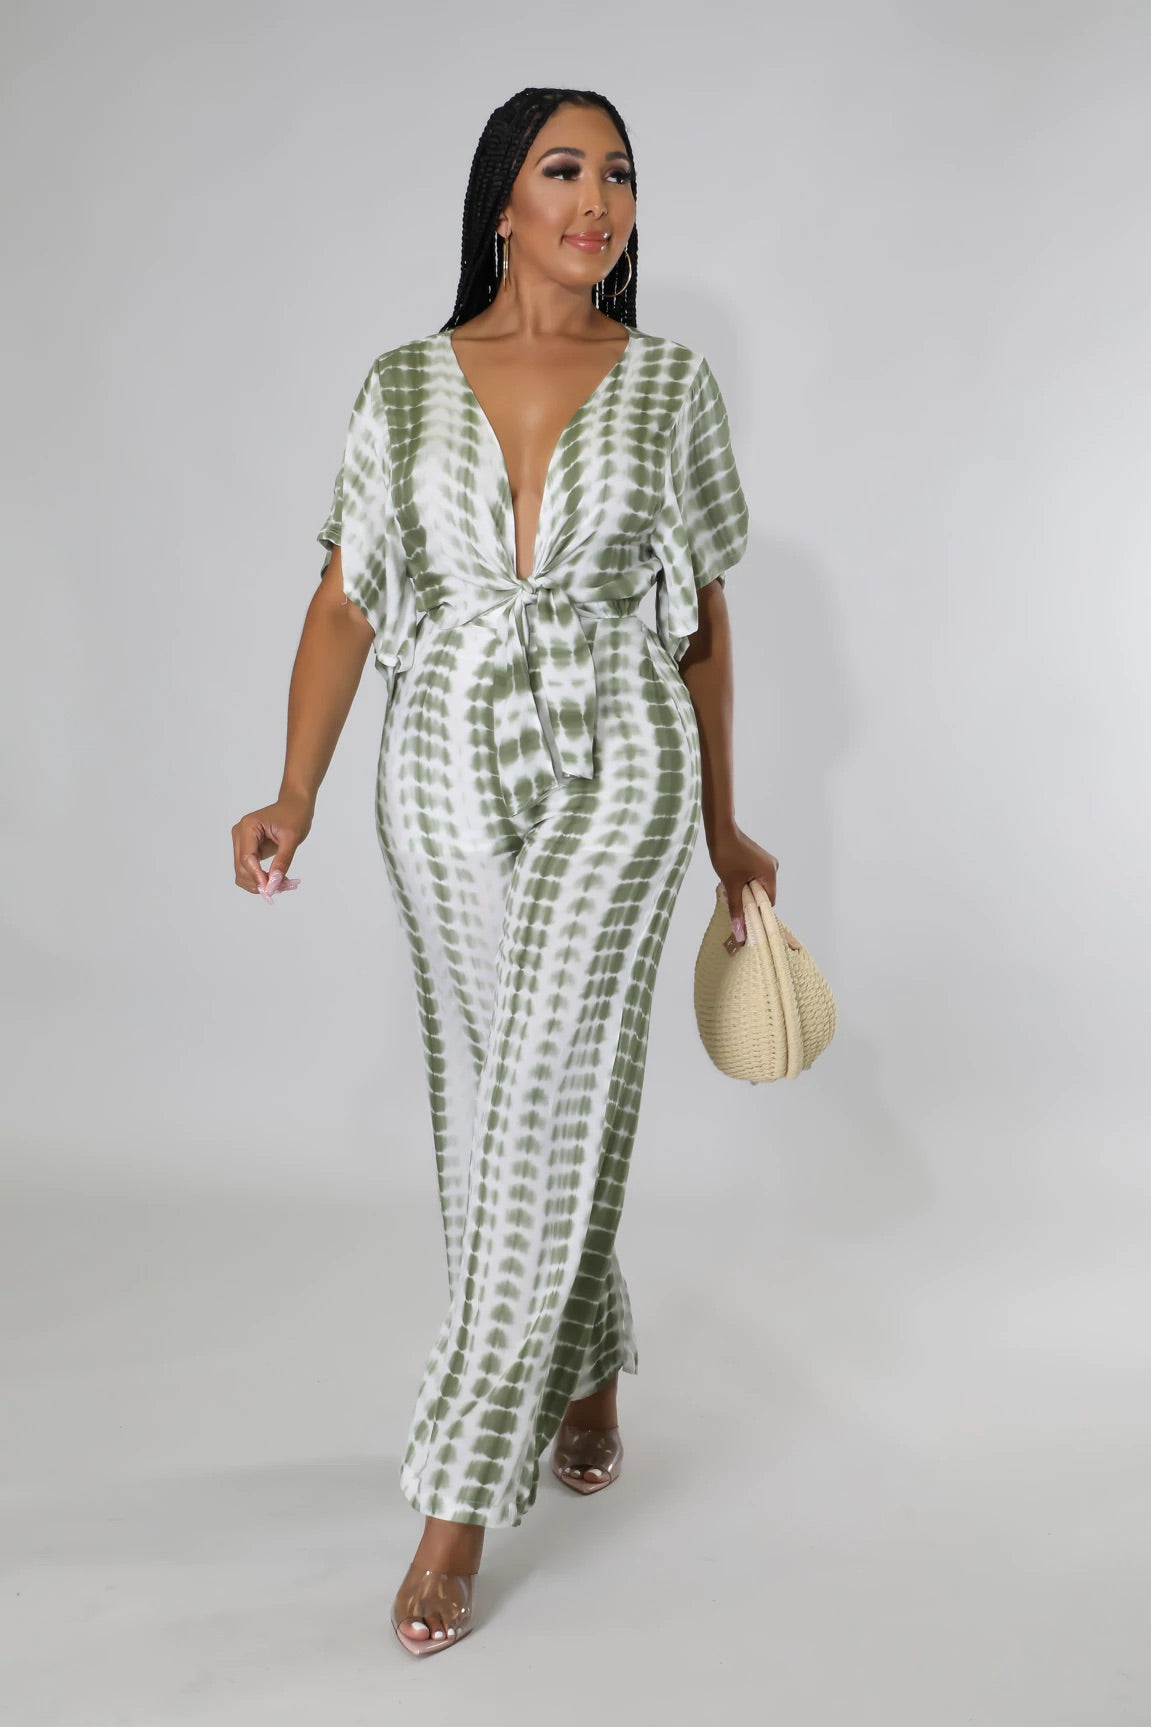 Blurred Lines Tie Dye Jumpsuit Olive - Ali’s Couture 